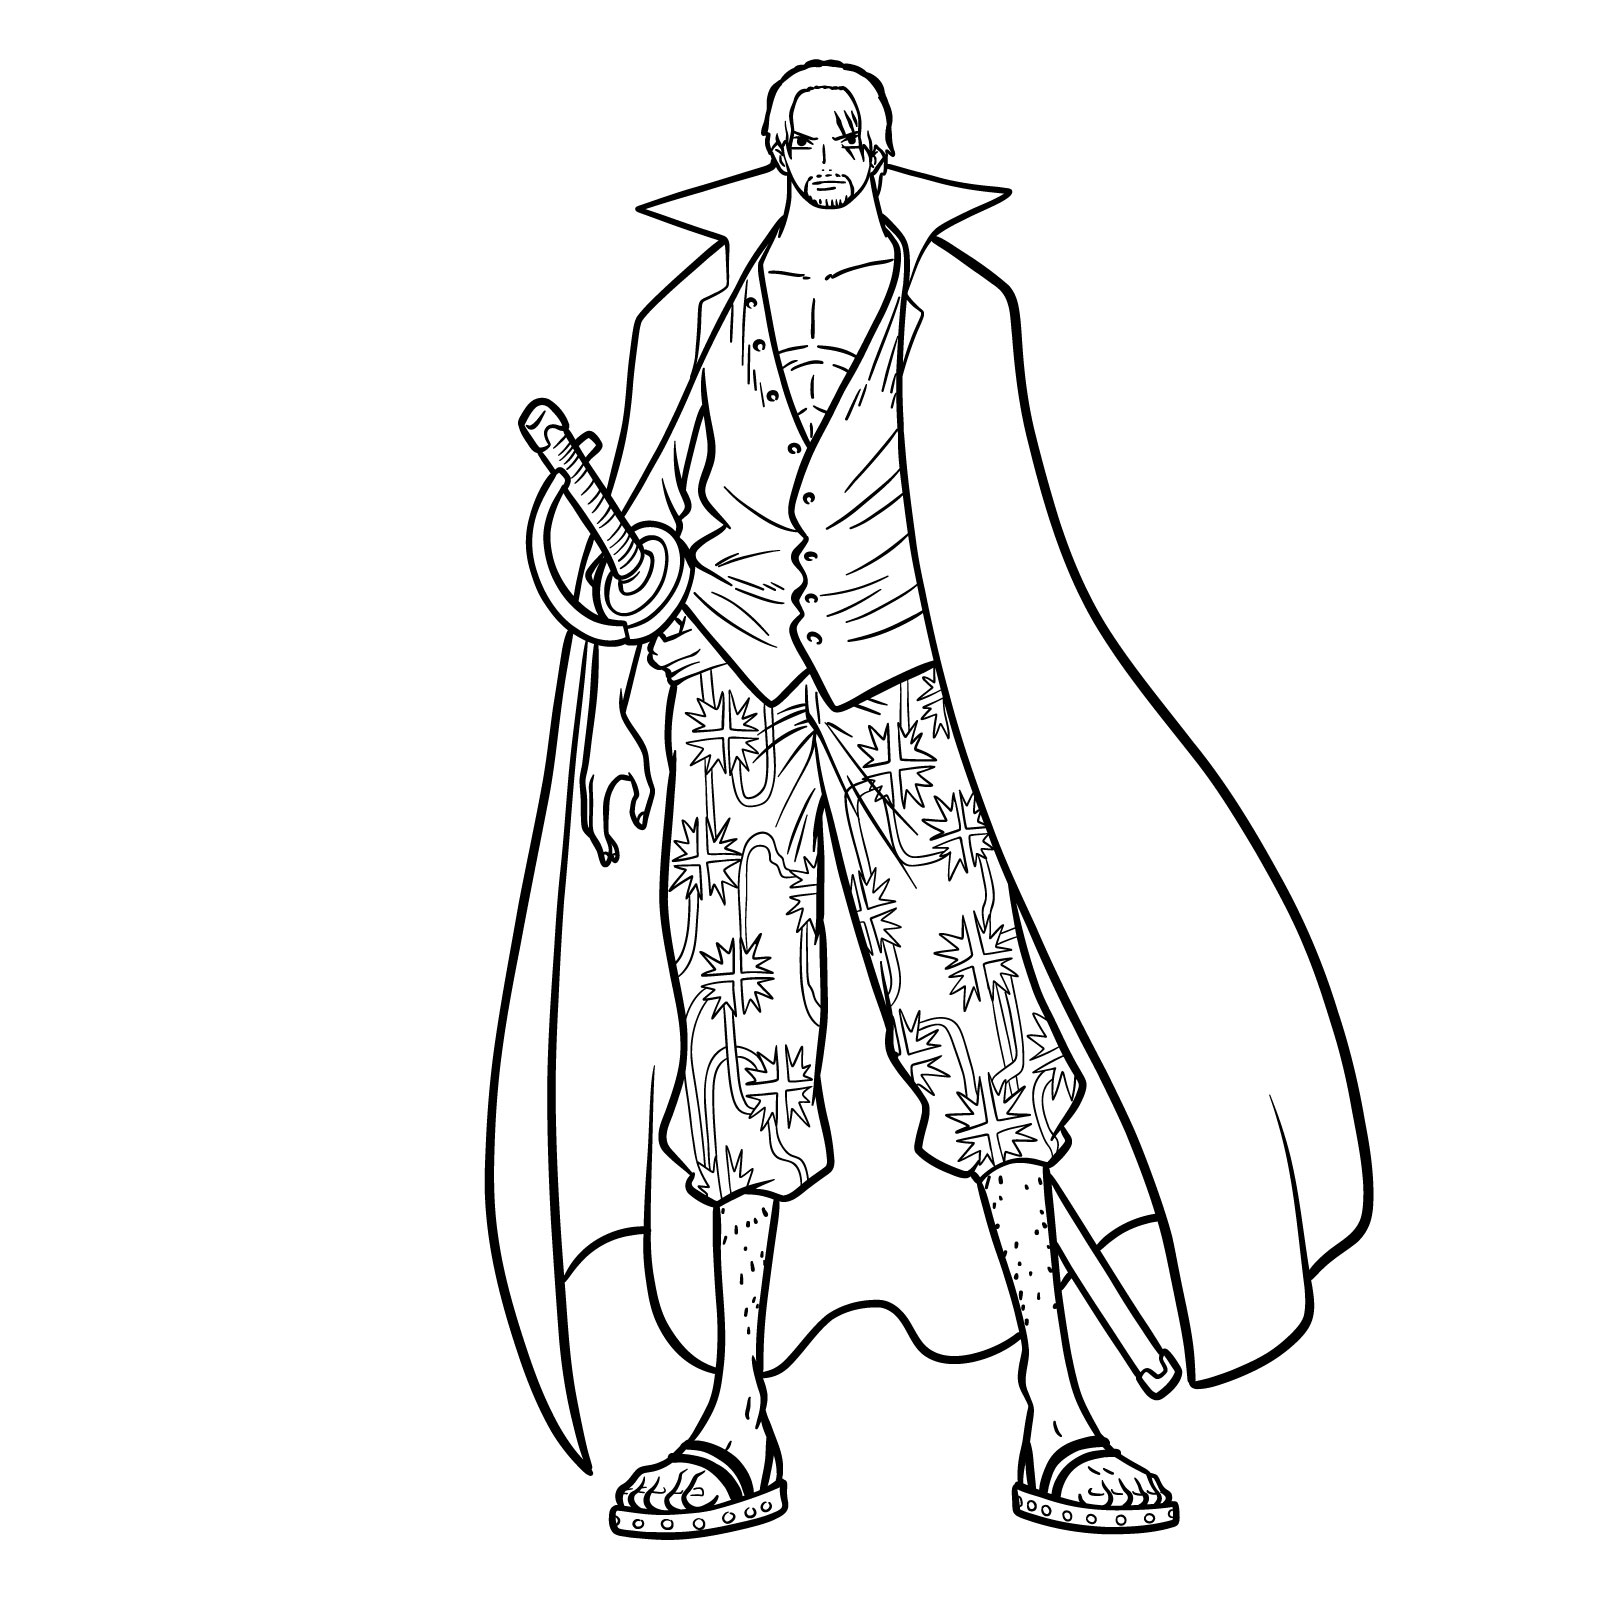 How to Draw Shanks full body - final step